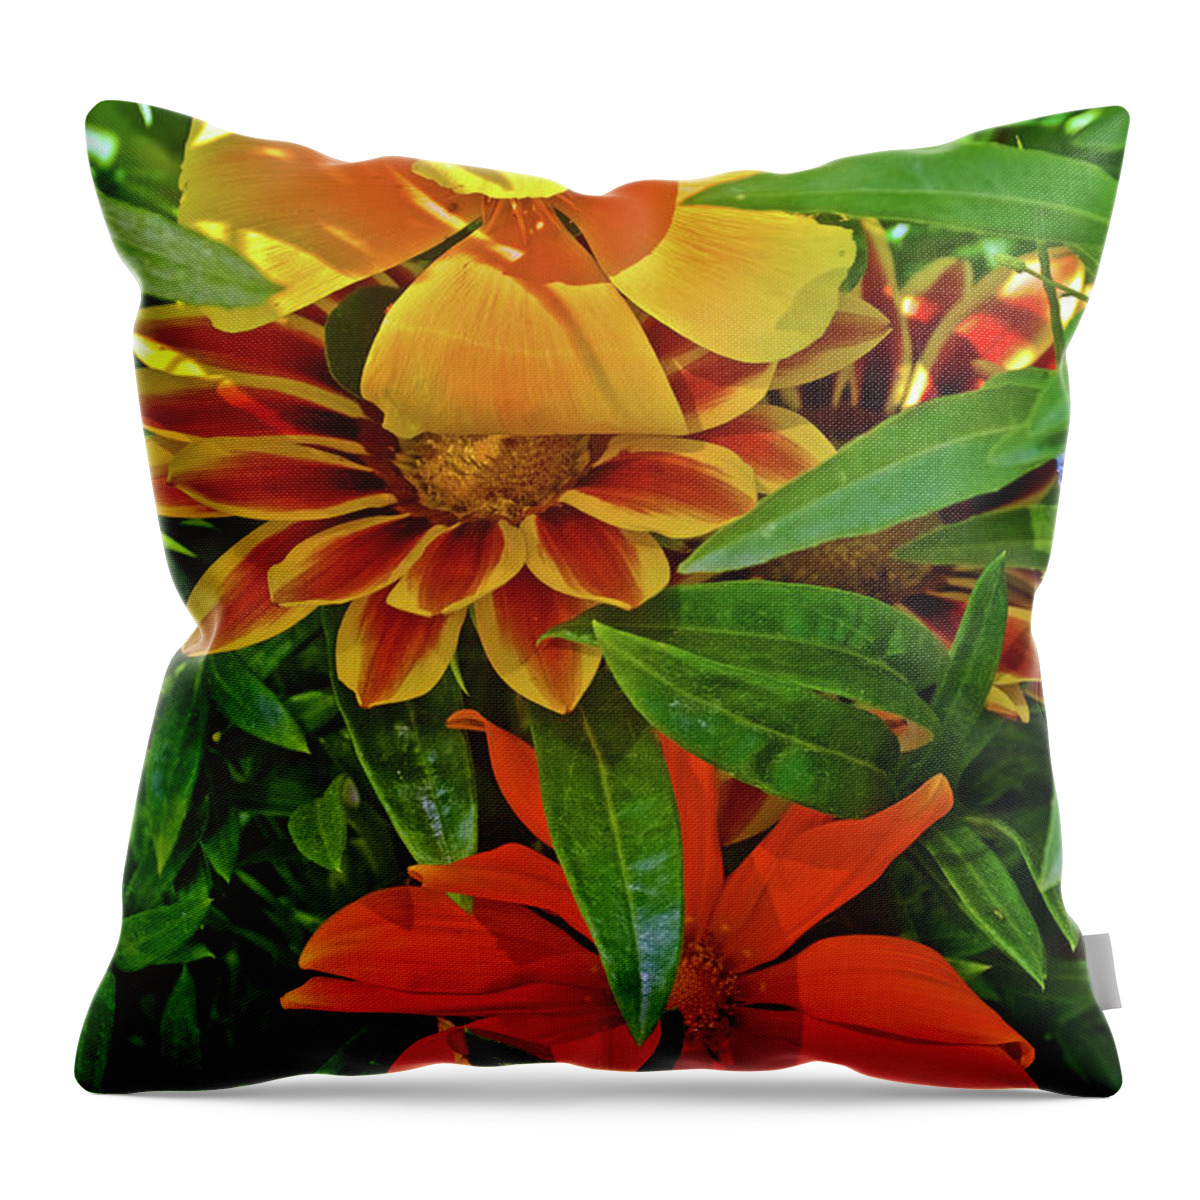 Flower Totem Pole On Harvard St. In Claremont Throw Pillow featuring the photograph Flower Totem Pole on Harvard St. Claremont, California by Ruth Hager